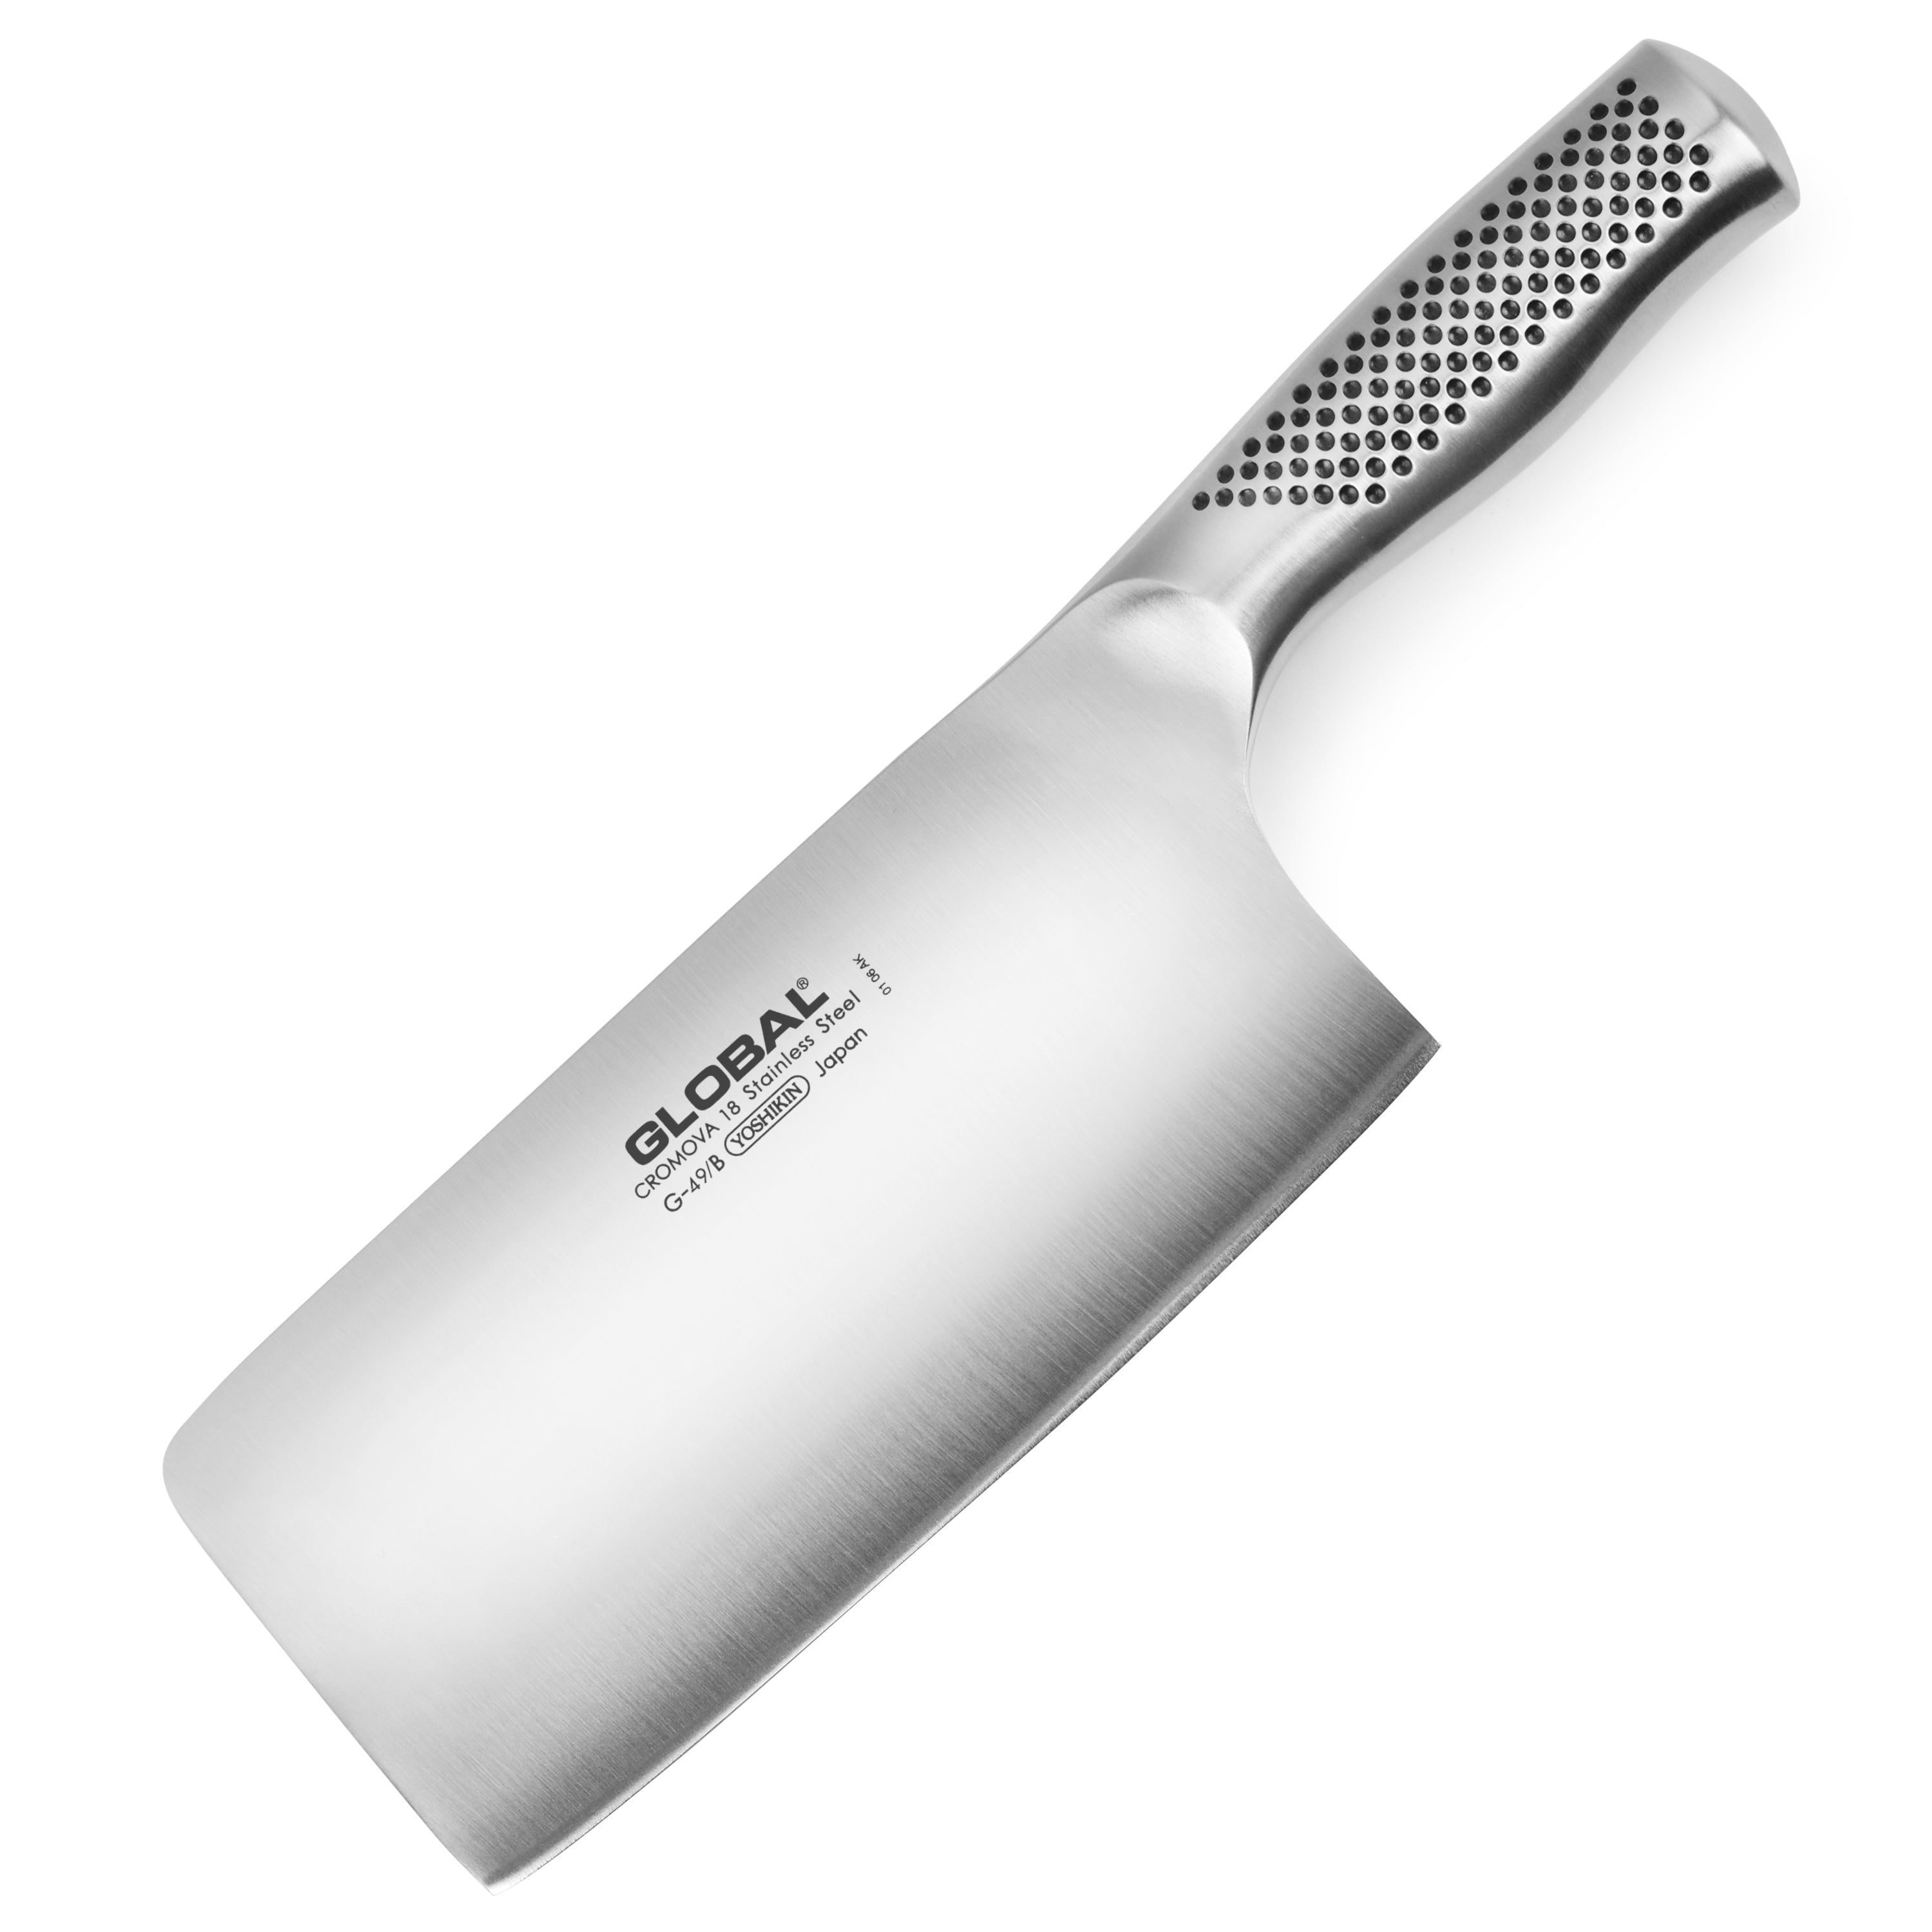 Global 7 Chinese Vegetable Cleaver